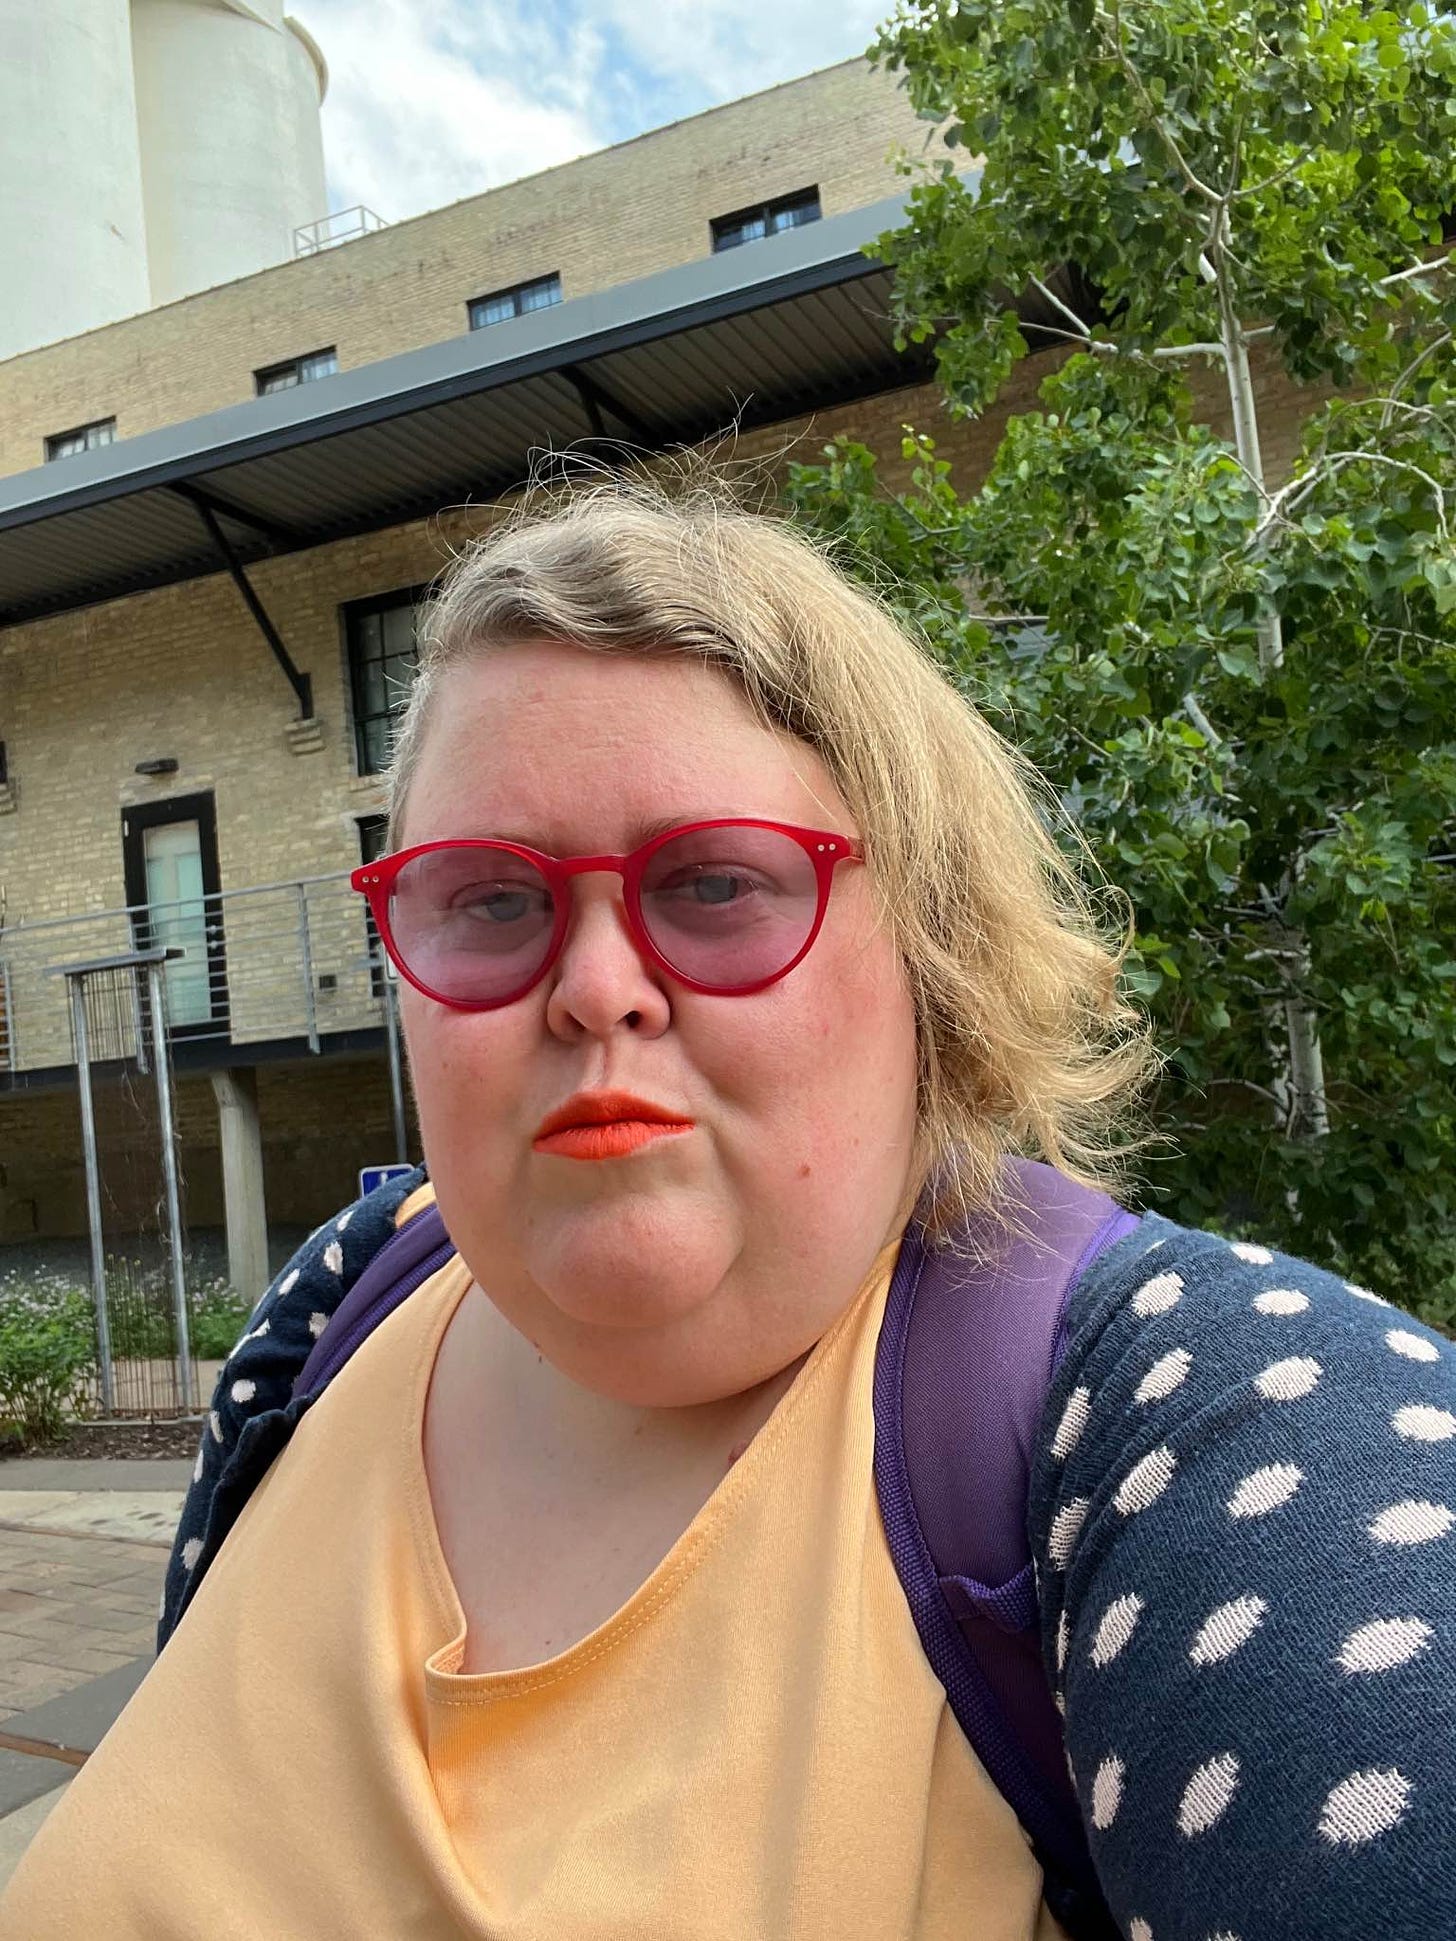 A selfie of me, Alison, a white woman with asymmetrical blonde hair wearing red migraine glasses, a yellow top with a blue polka dot sweater in front of greenery and an old brick building